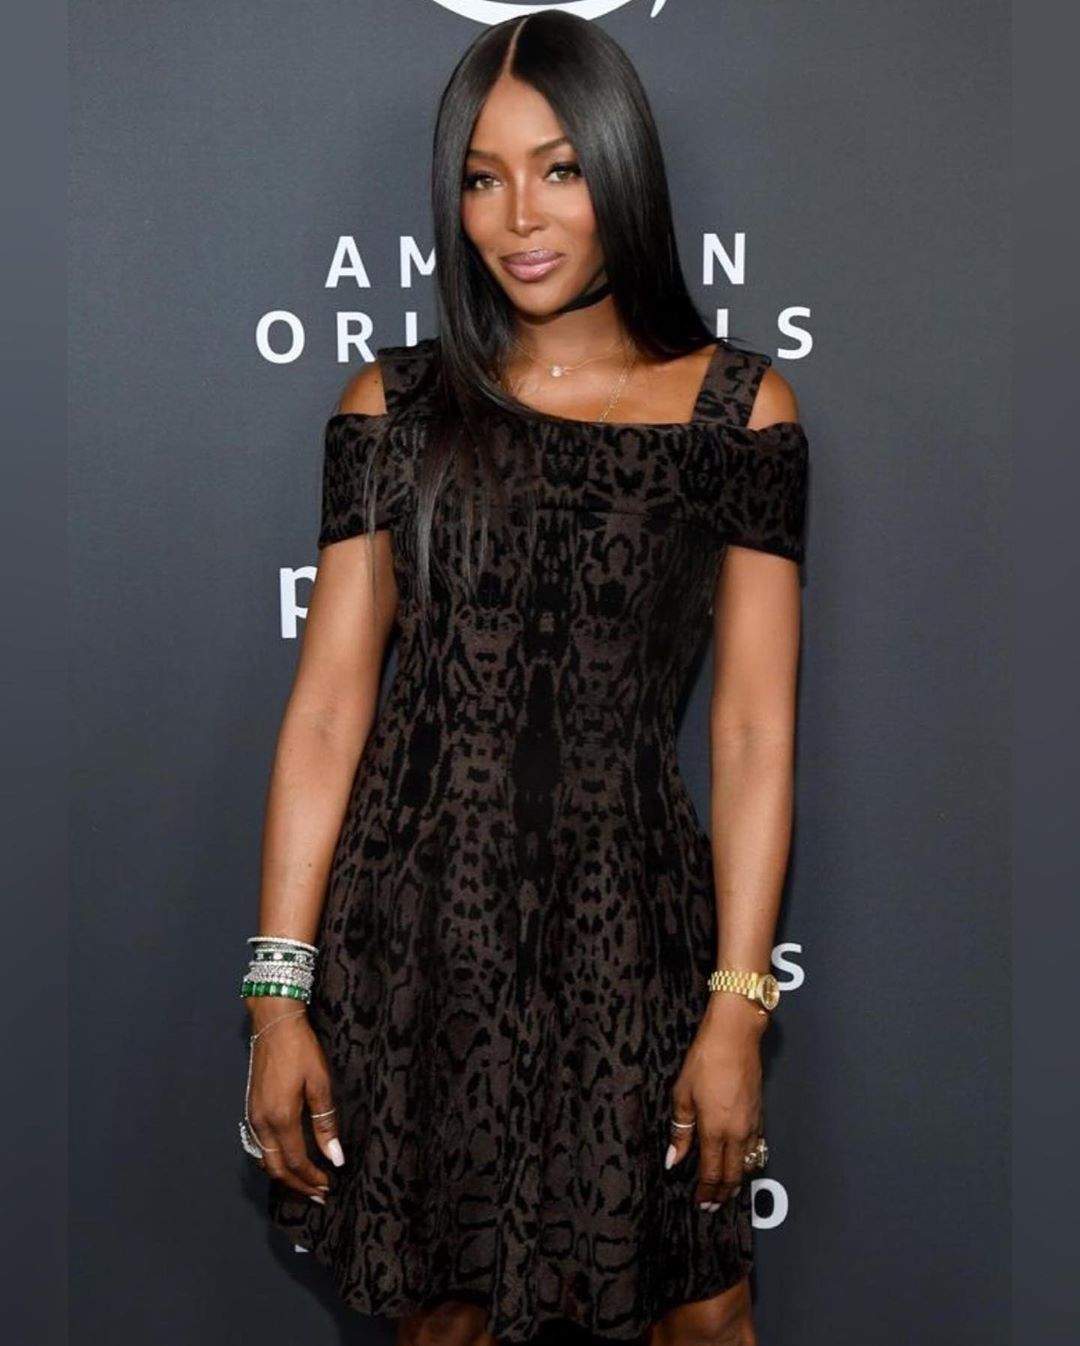 Naomi Campbell writes open letter to Grammy Awards organizers after Burna Boy's loss at its 2020 edition